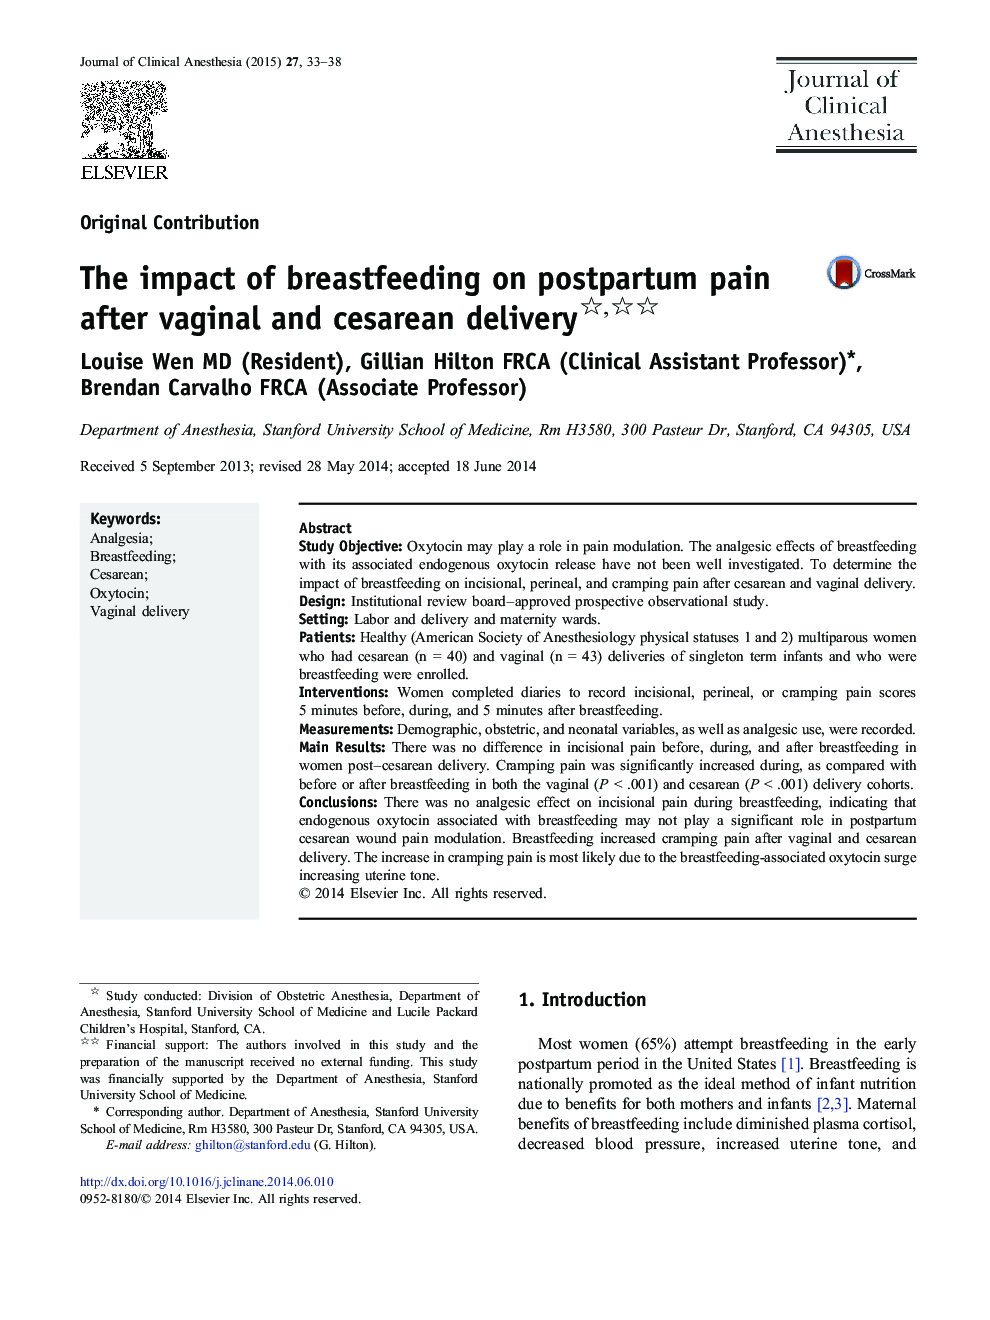 The impact of breastfeeding on postpartum pain after vaginal and cesarean delivery 